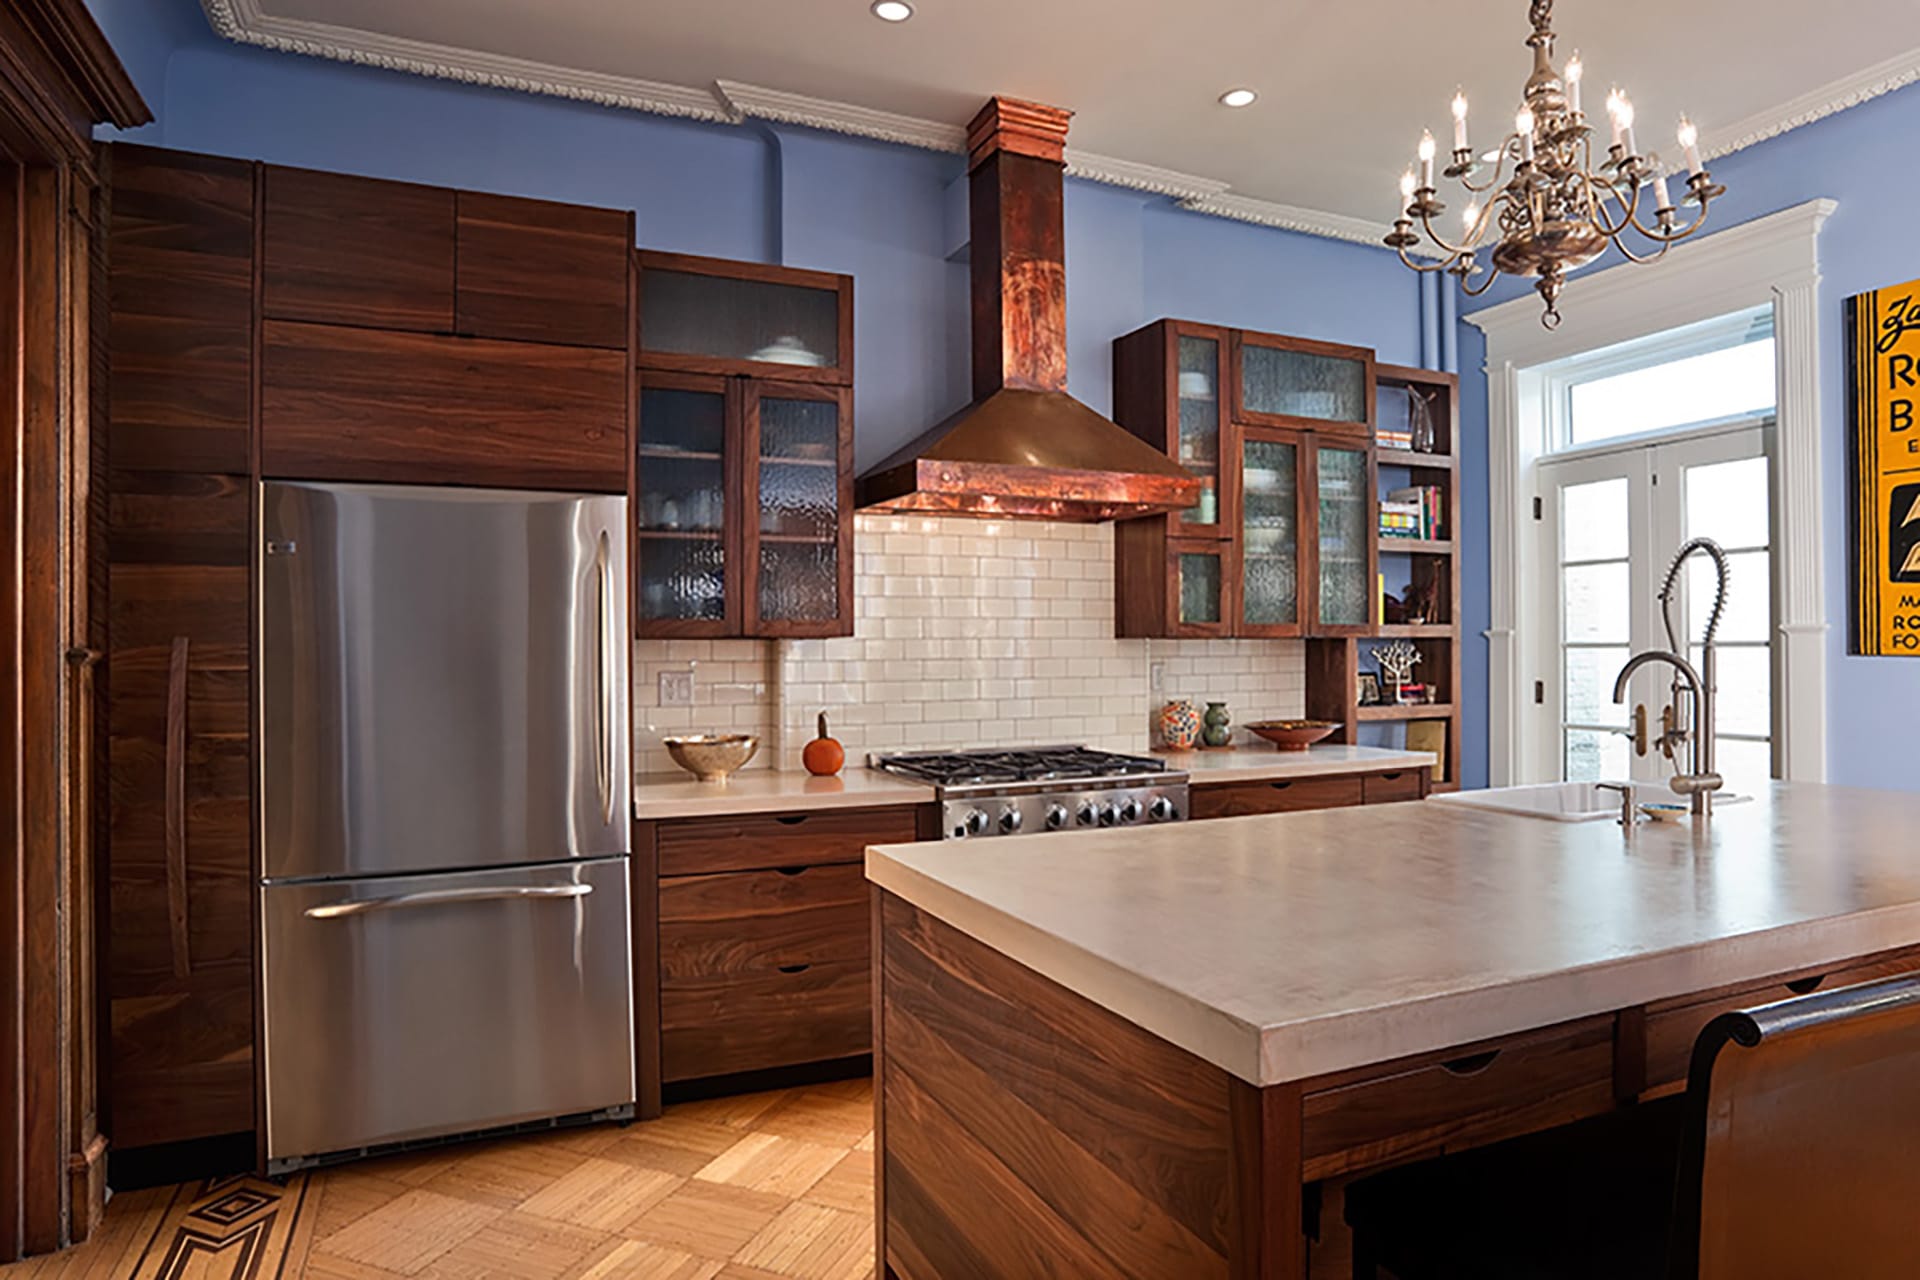 Kitchen with lilac paint, dark wood cabinetry, a copper range hood, and chandelier above the island.